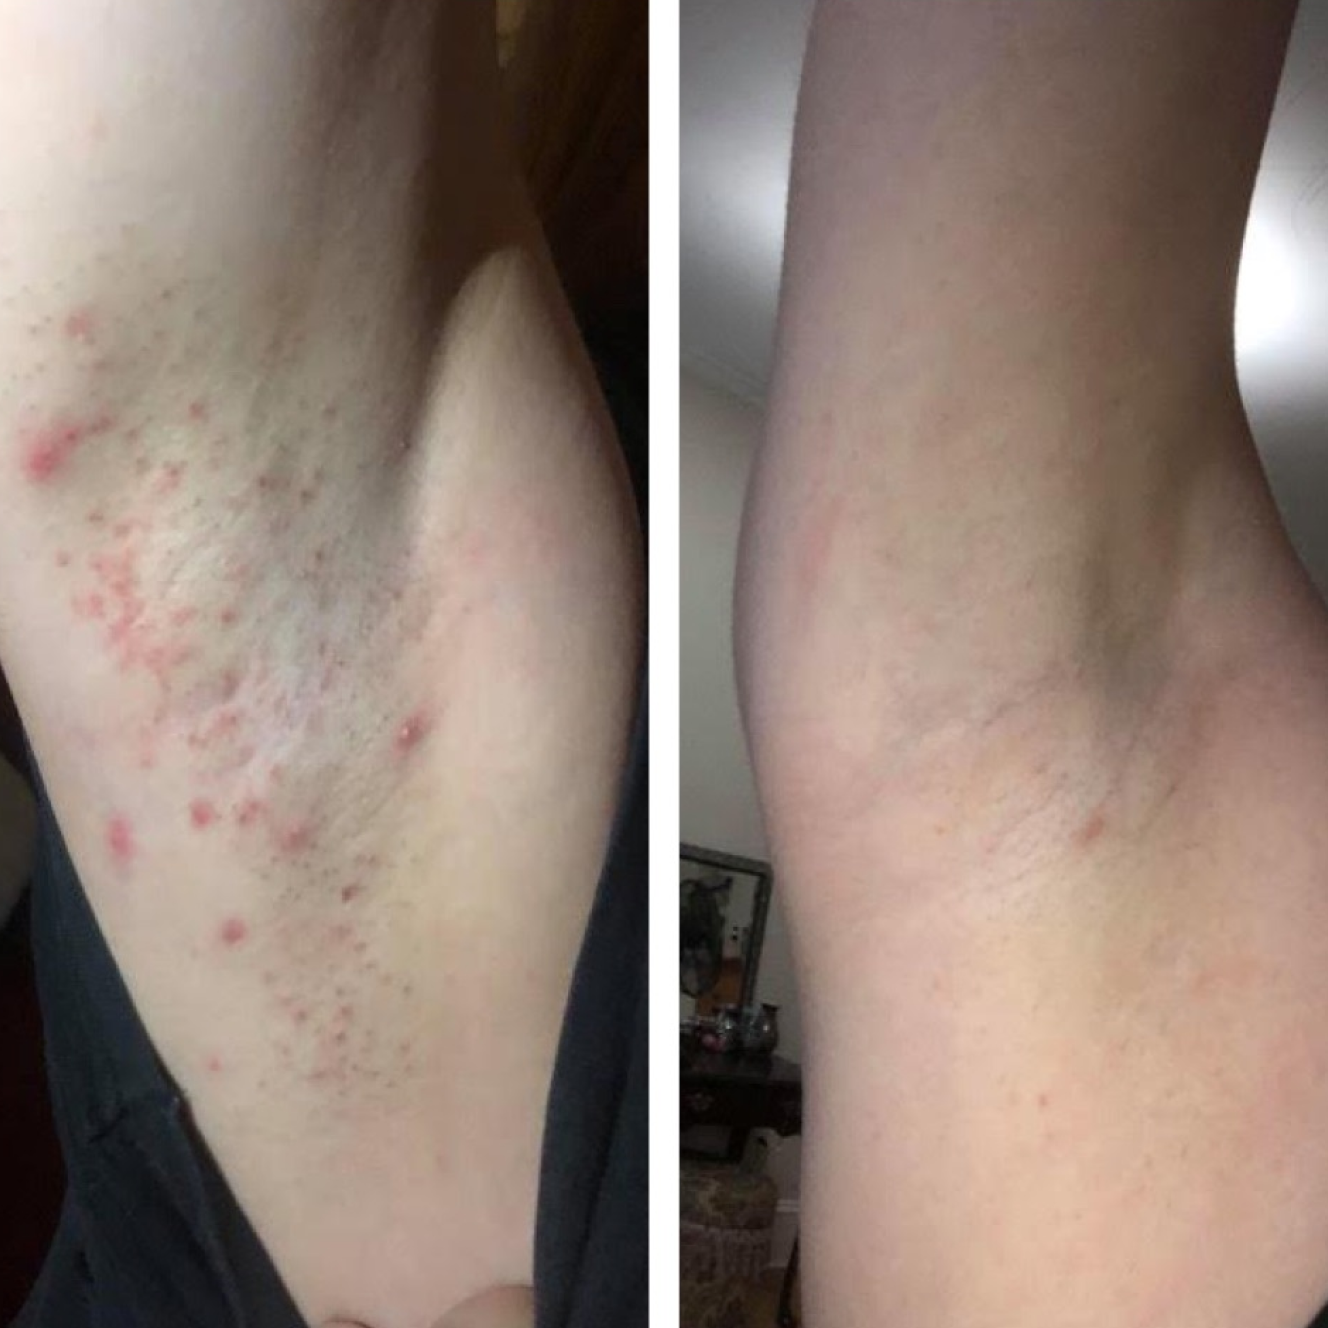 Before & After closeup image Bushbalm itchy ingrown hairs